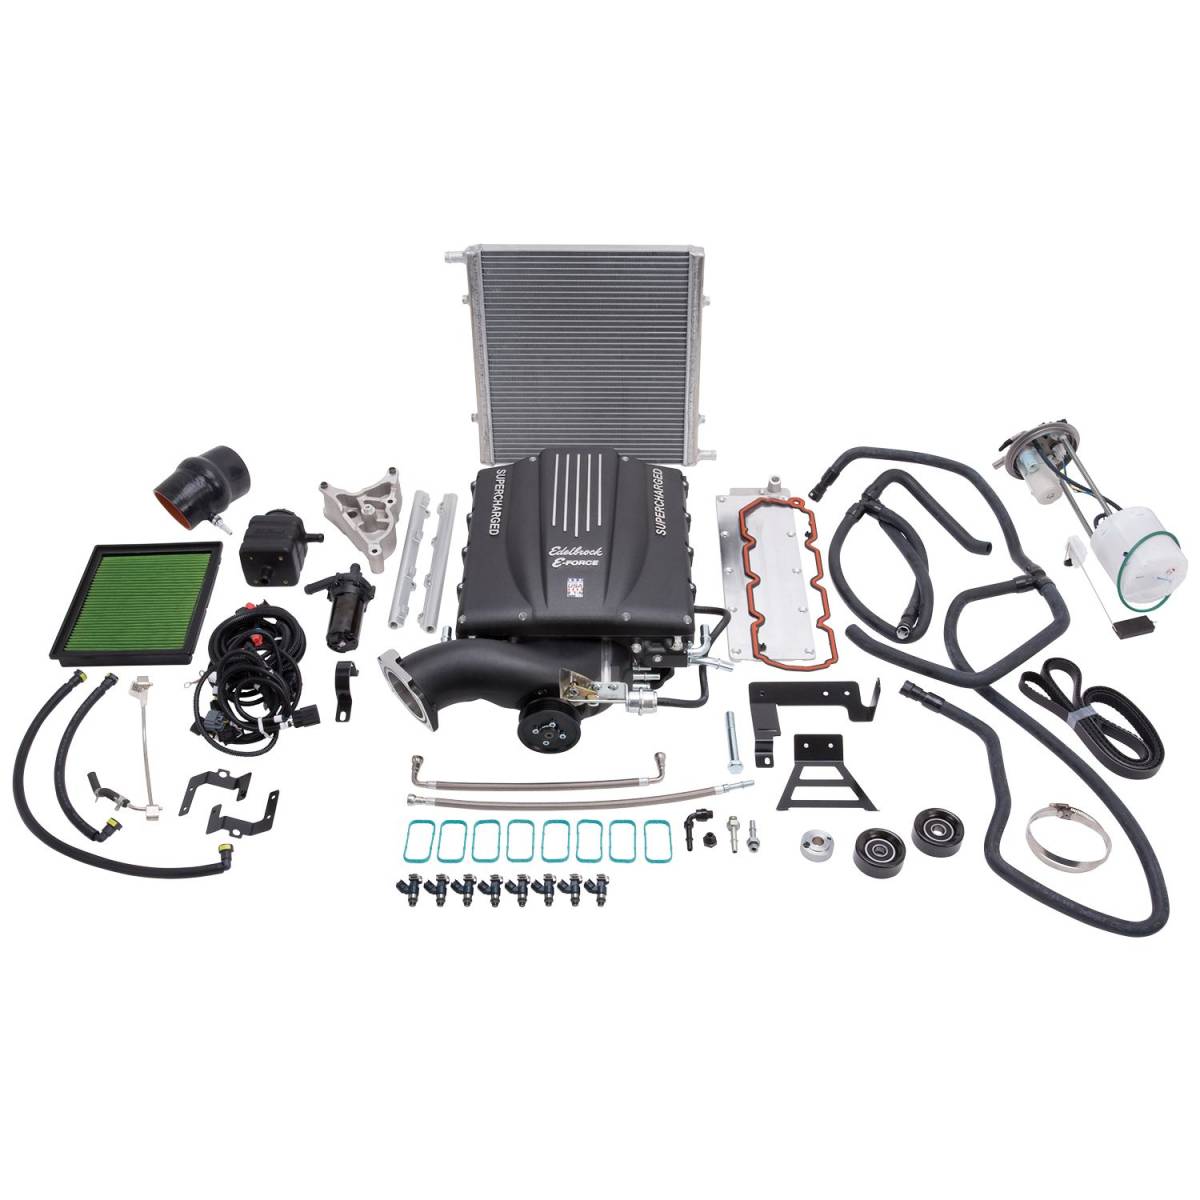 Edelbrock - Chevy Silverado GMC Sierra 2500 6.0L 2007-2010 Edelbrock Stage 1 Complete Supercharger Intercooled Kit Without Tune - Image 1